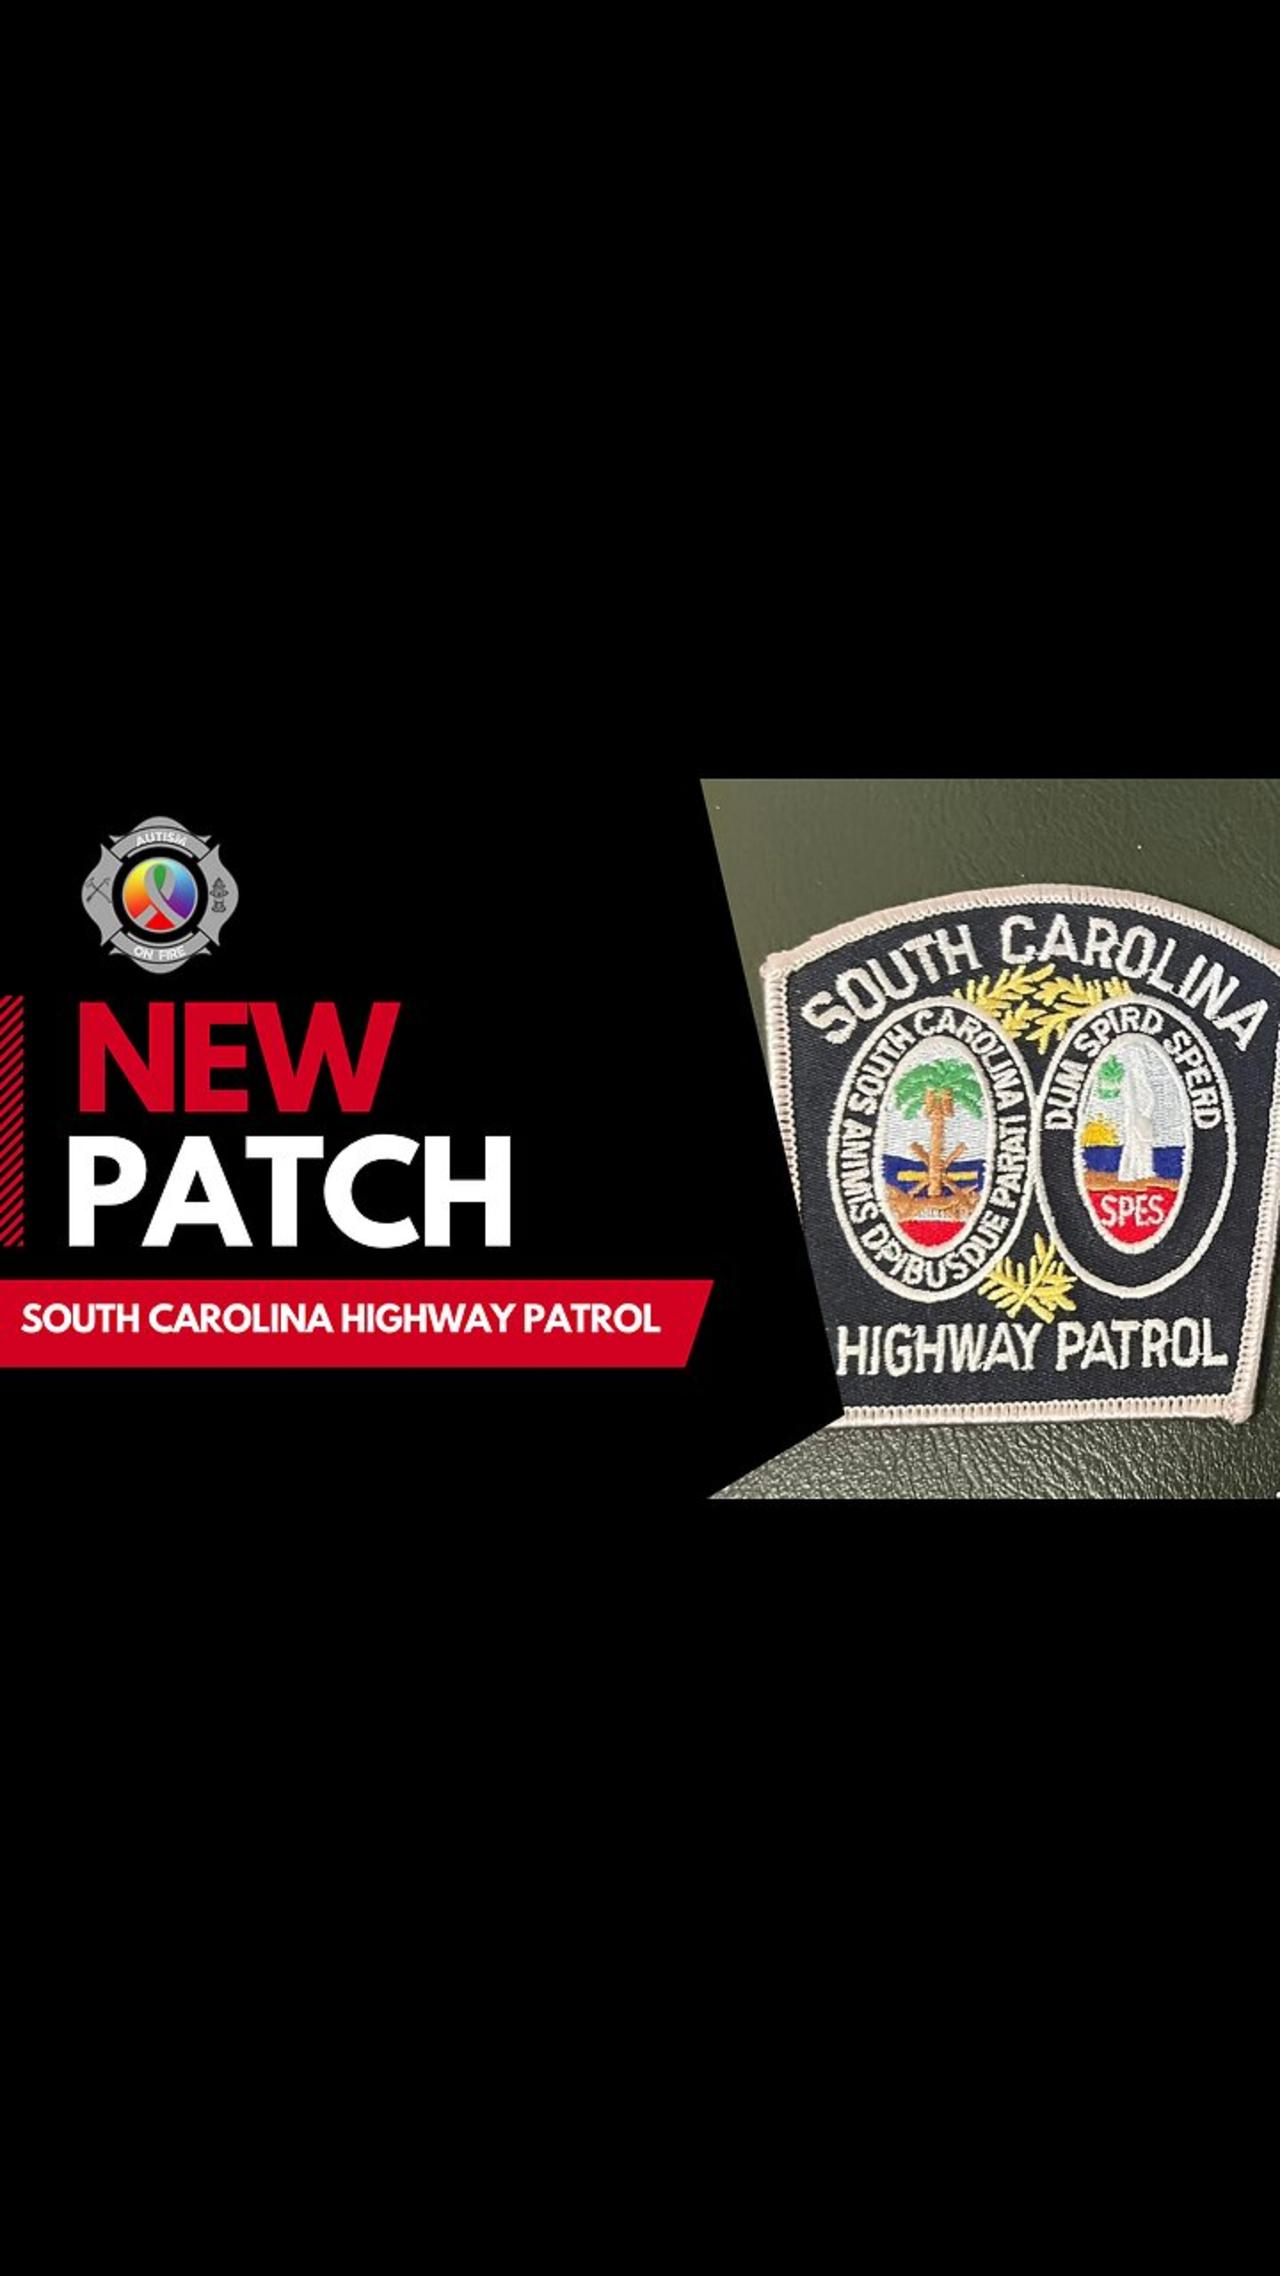 New Patch from South Carolina Highway Patrol